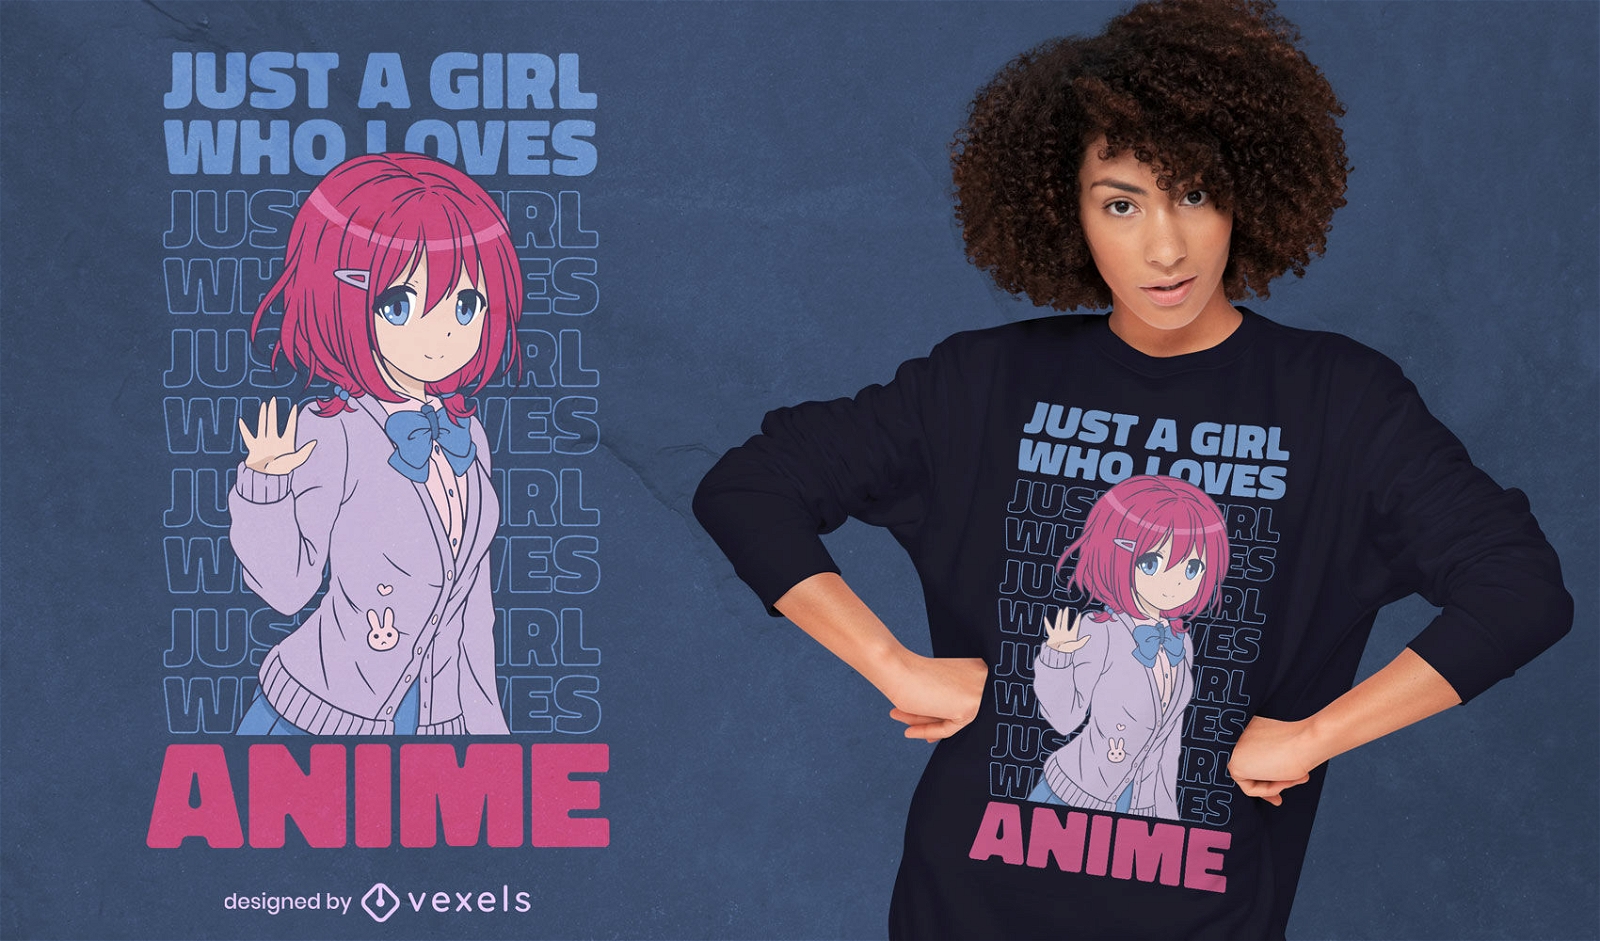 Anime girl quote t-shirt design